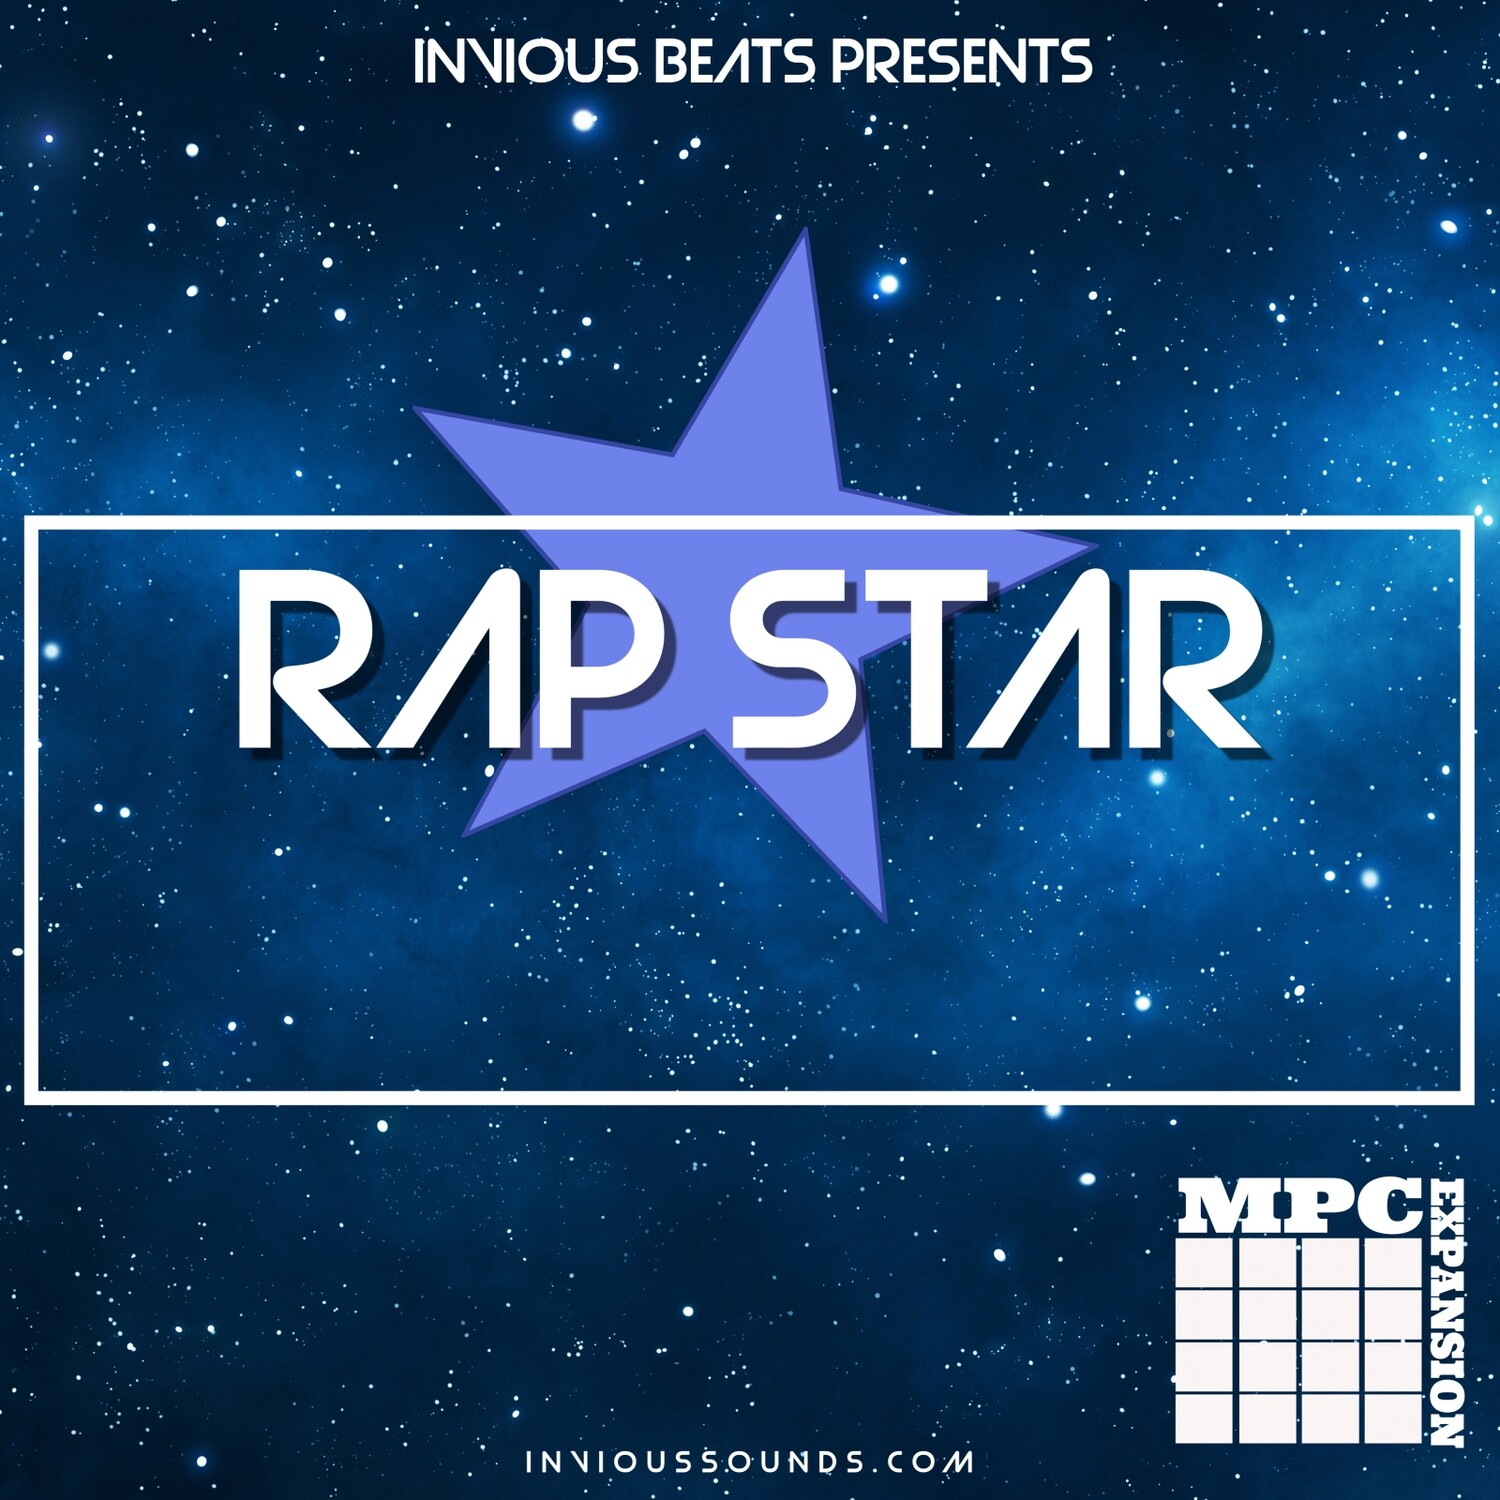 MPC EXPANSION 'RAP STAR' by INVIOUS